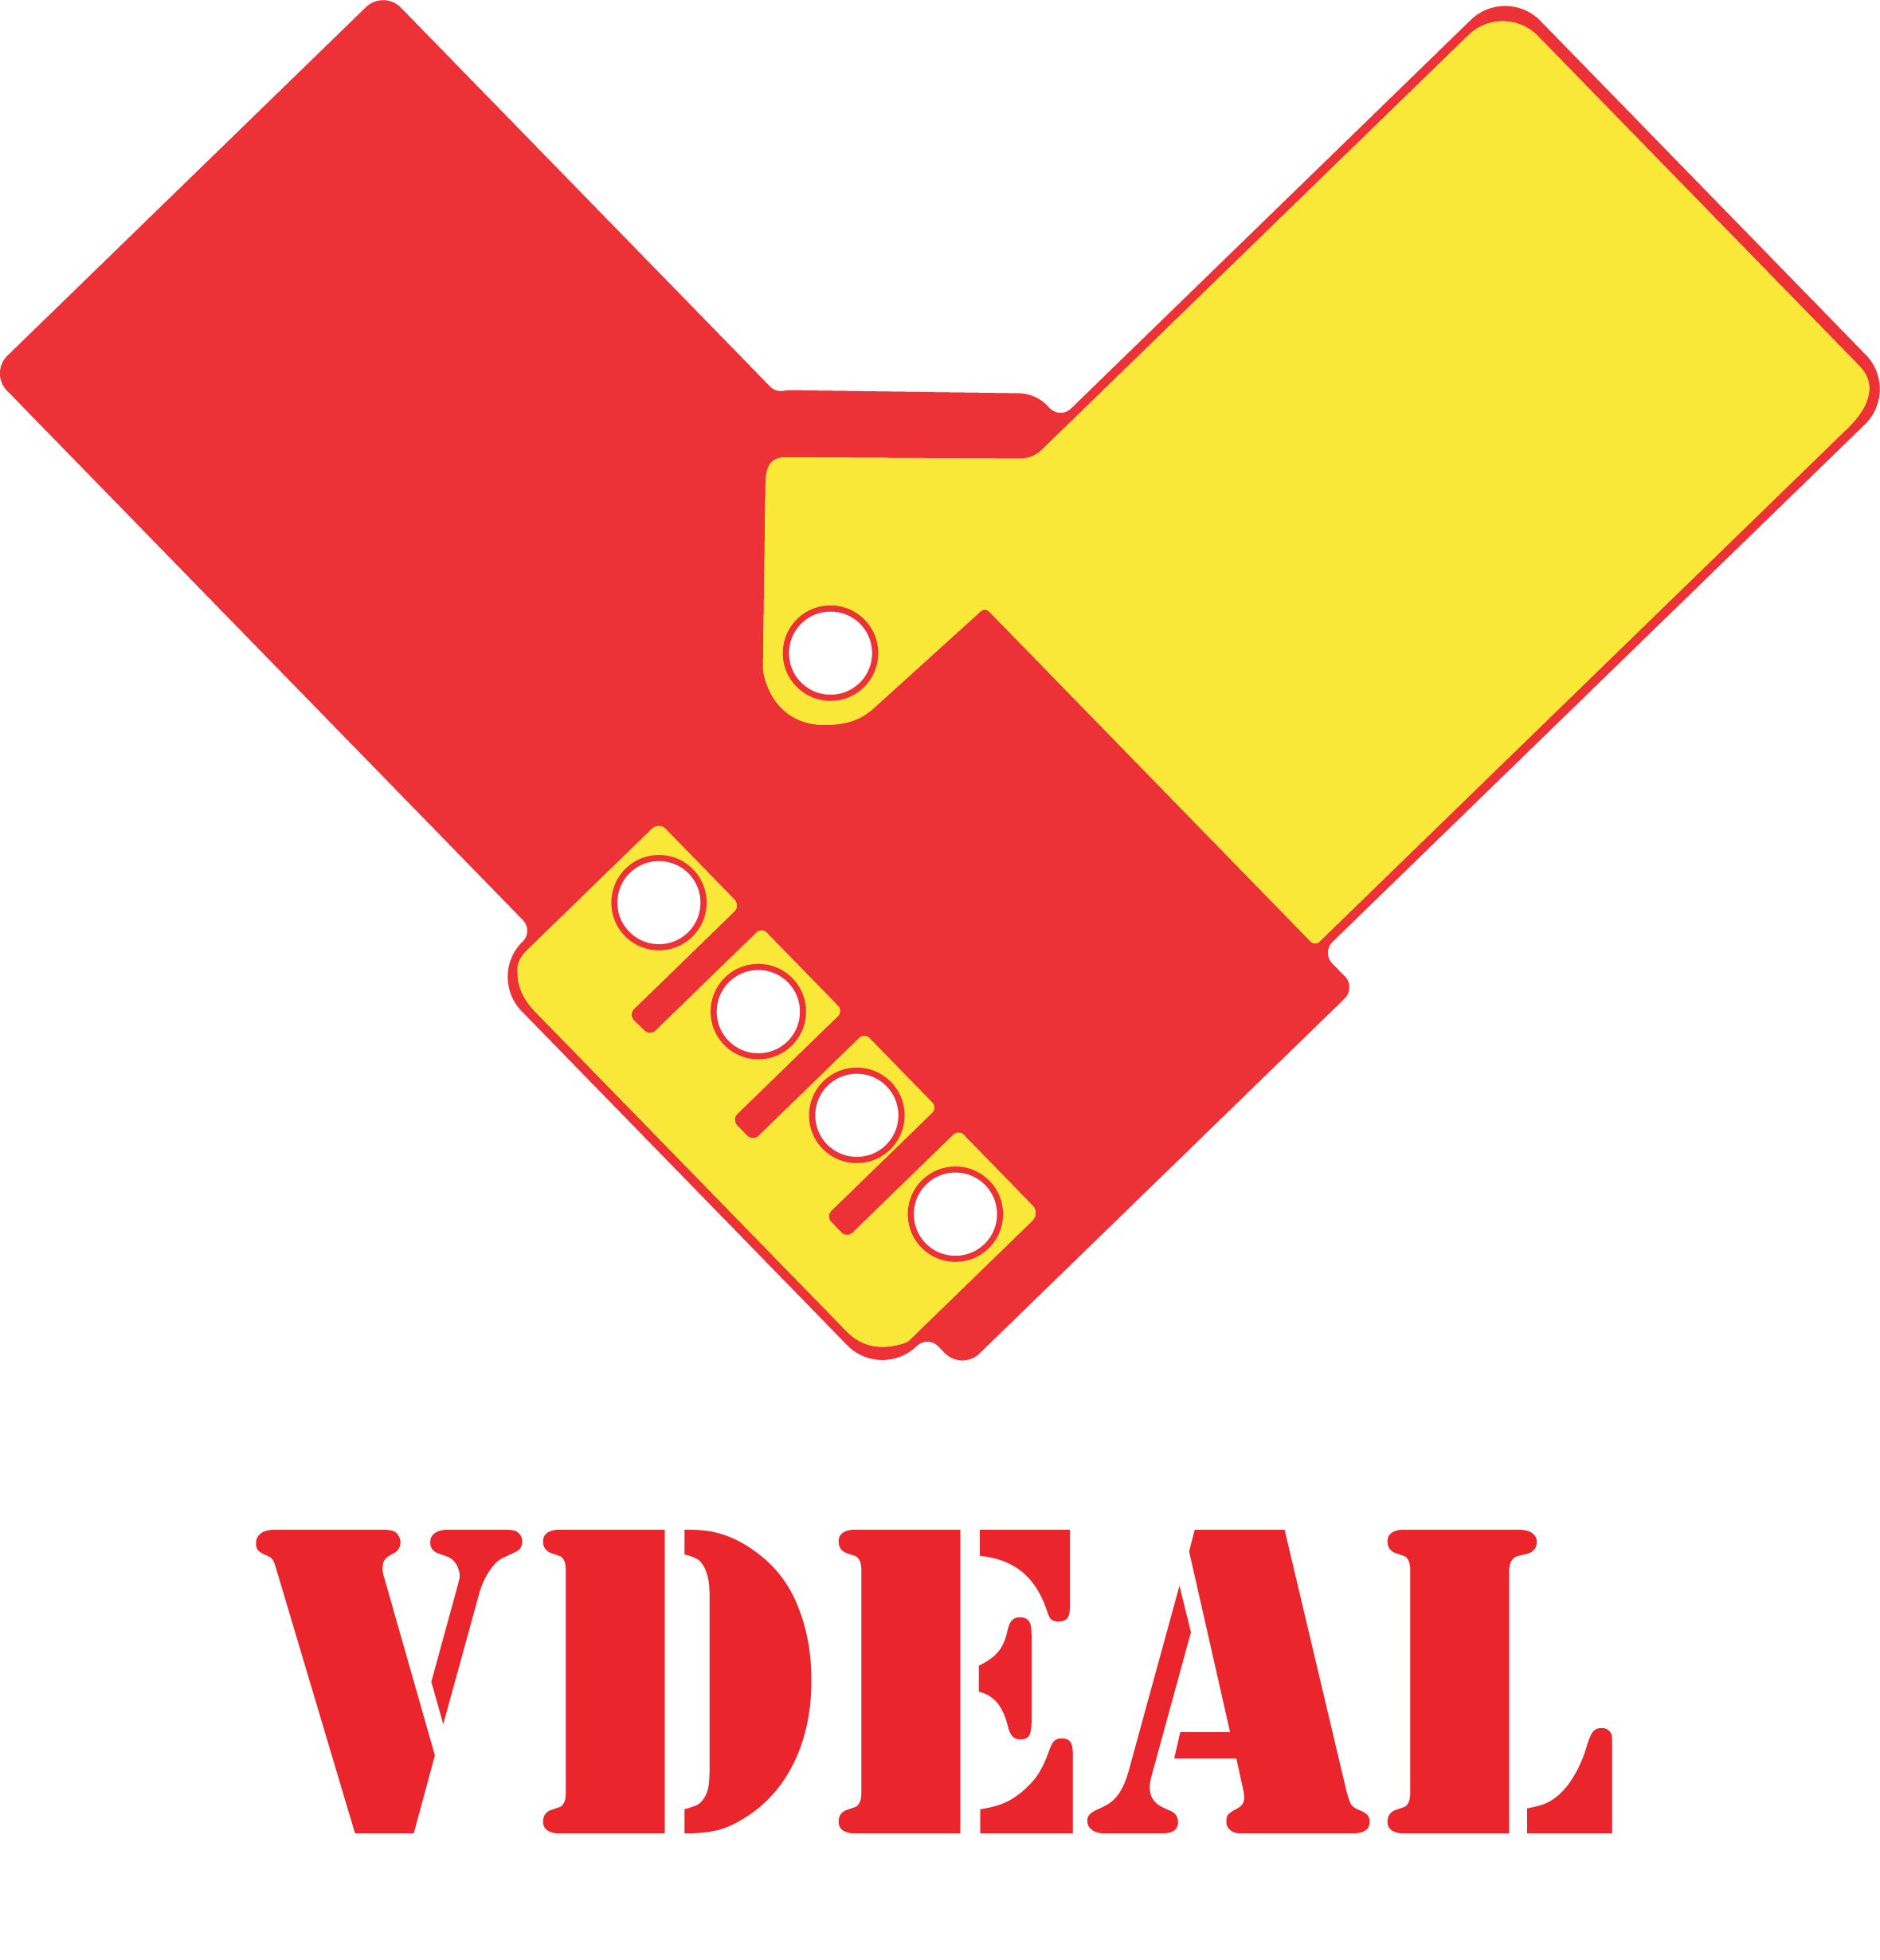 Vdeal system